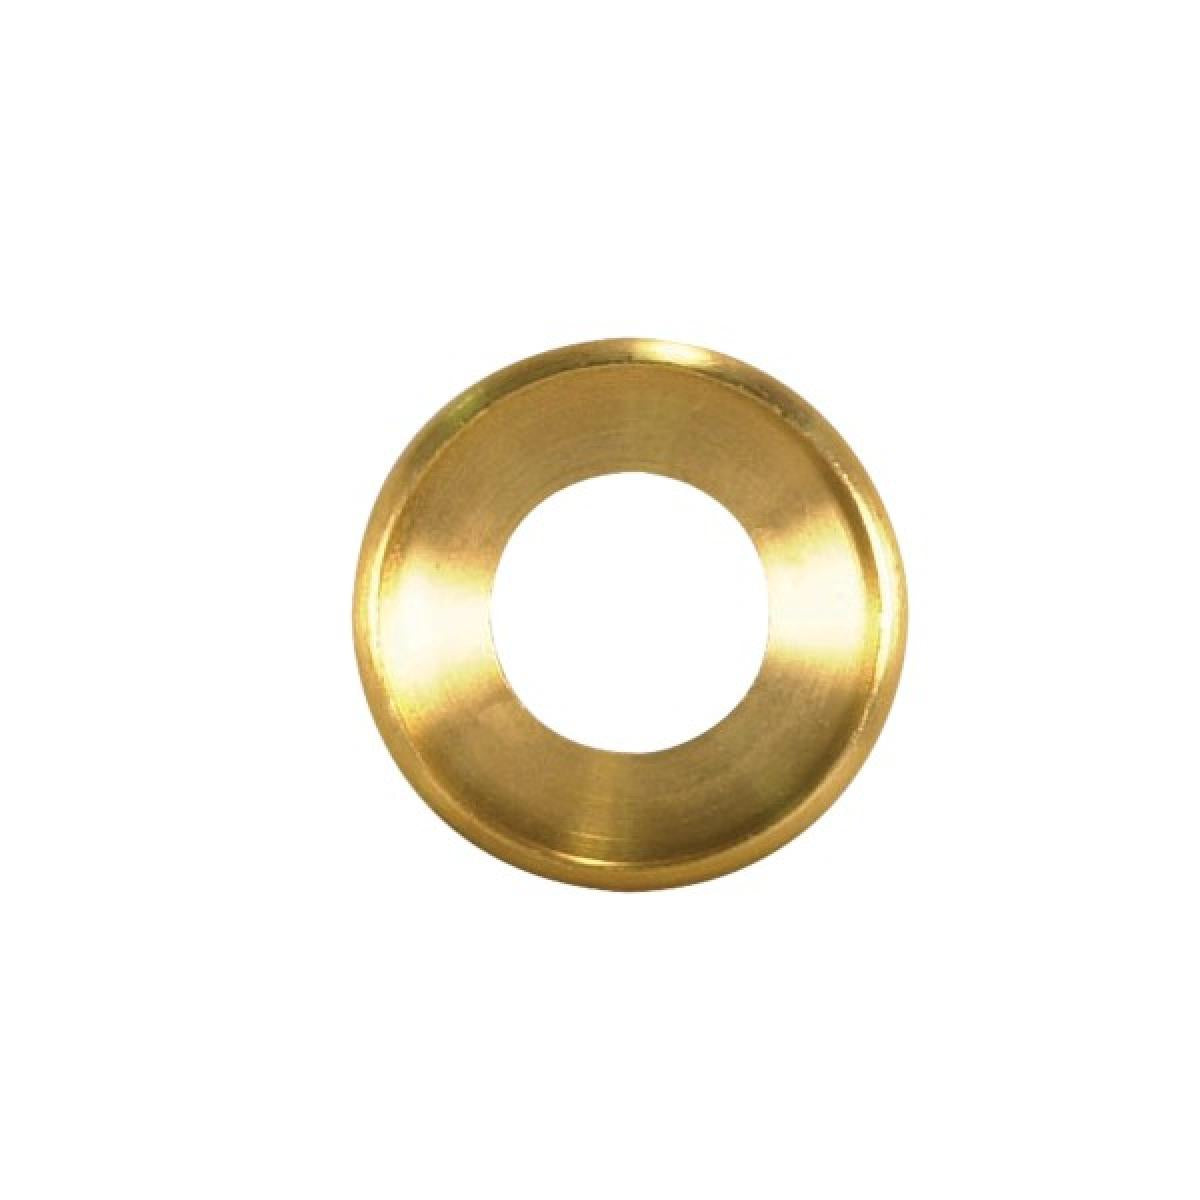 Satco 90-1611 Turned Brass Check Ring 1/4 IP Slip Unfinished 7/8" Diameter